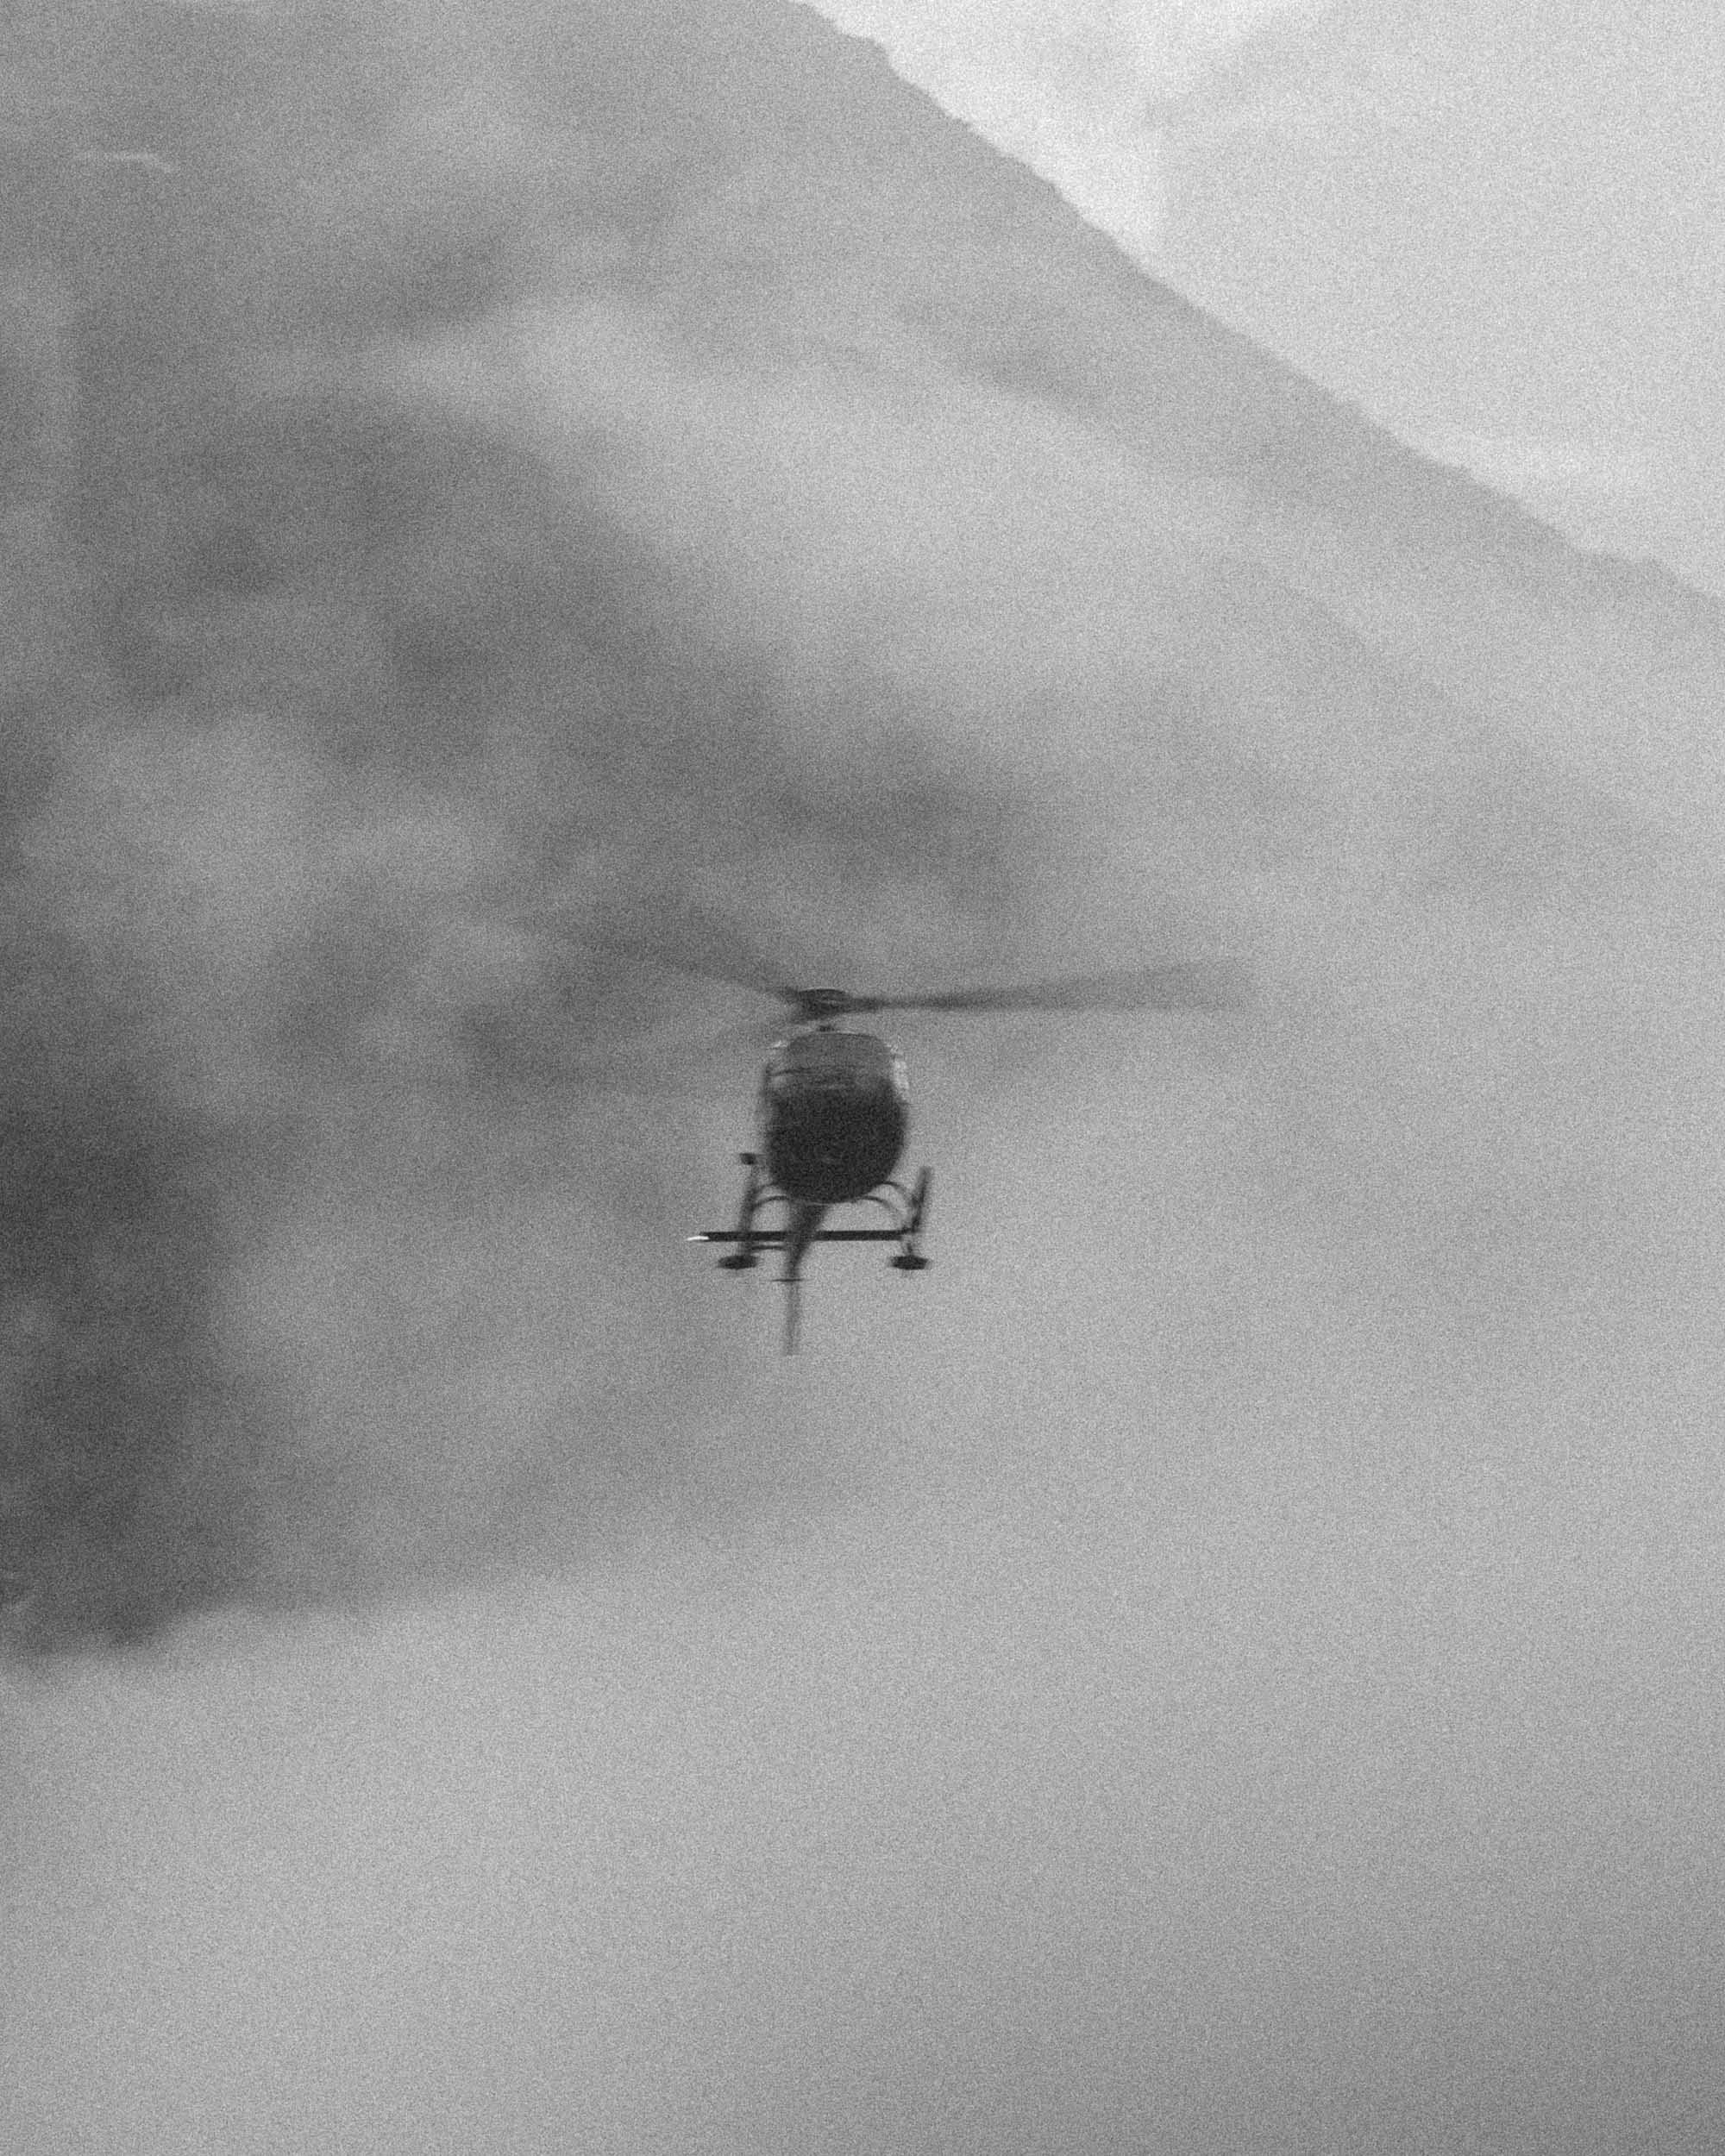 Watching a helicopter landing in the fog at Namche baazar